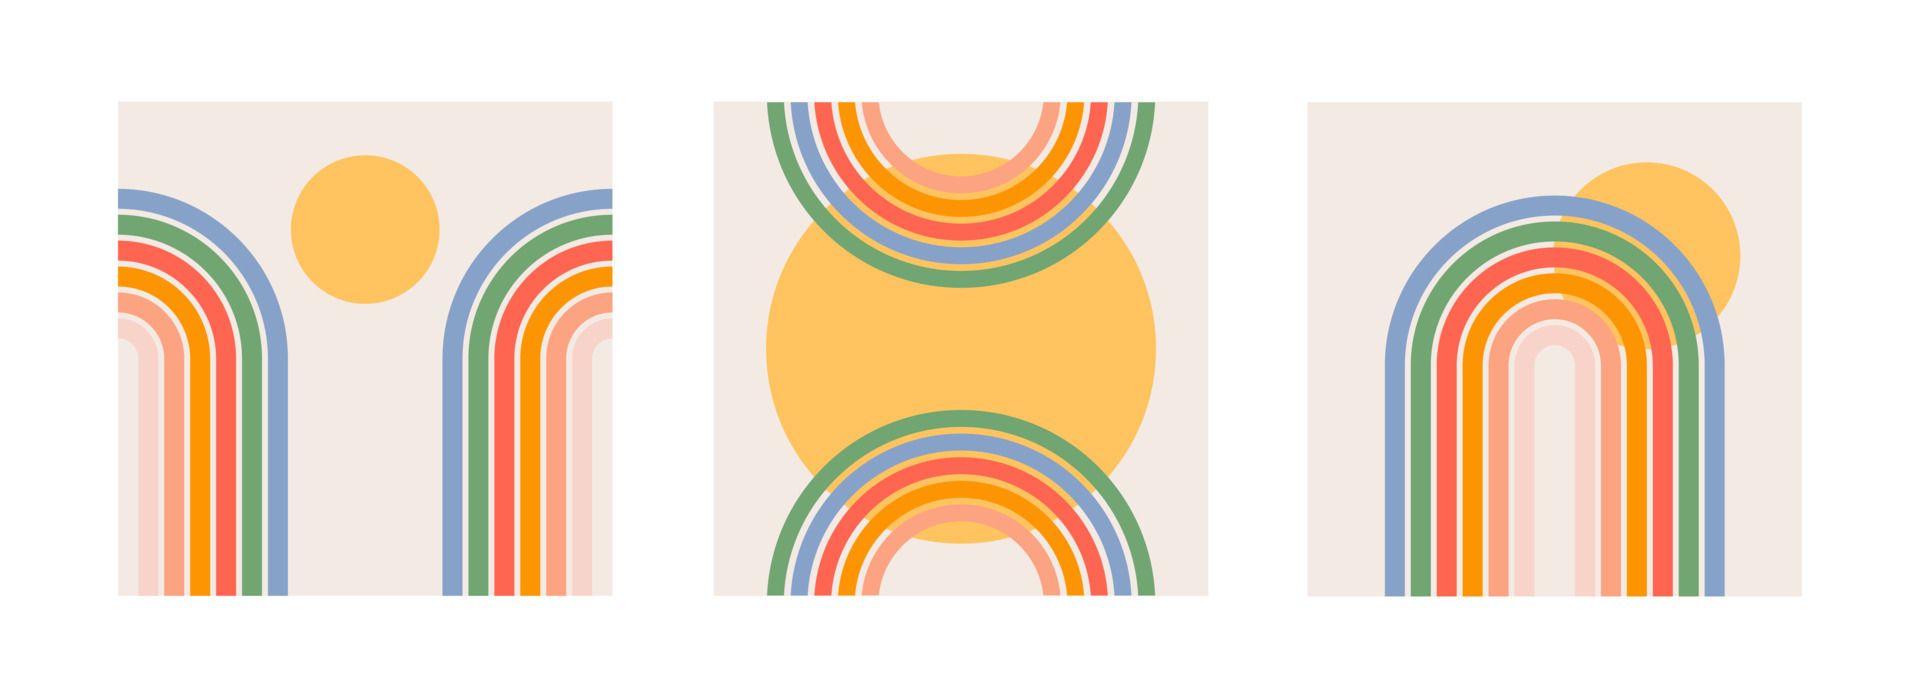 Three different colored rainbow designs on a white background - Rainbows